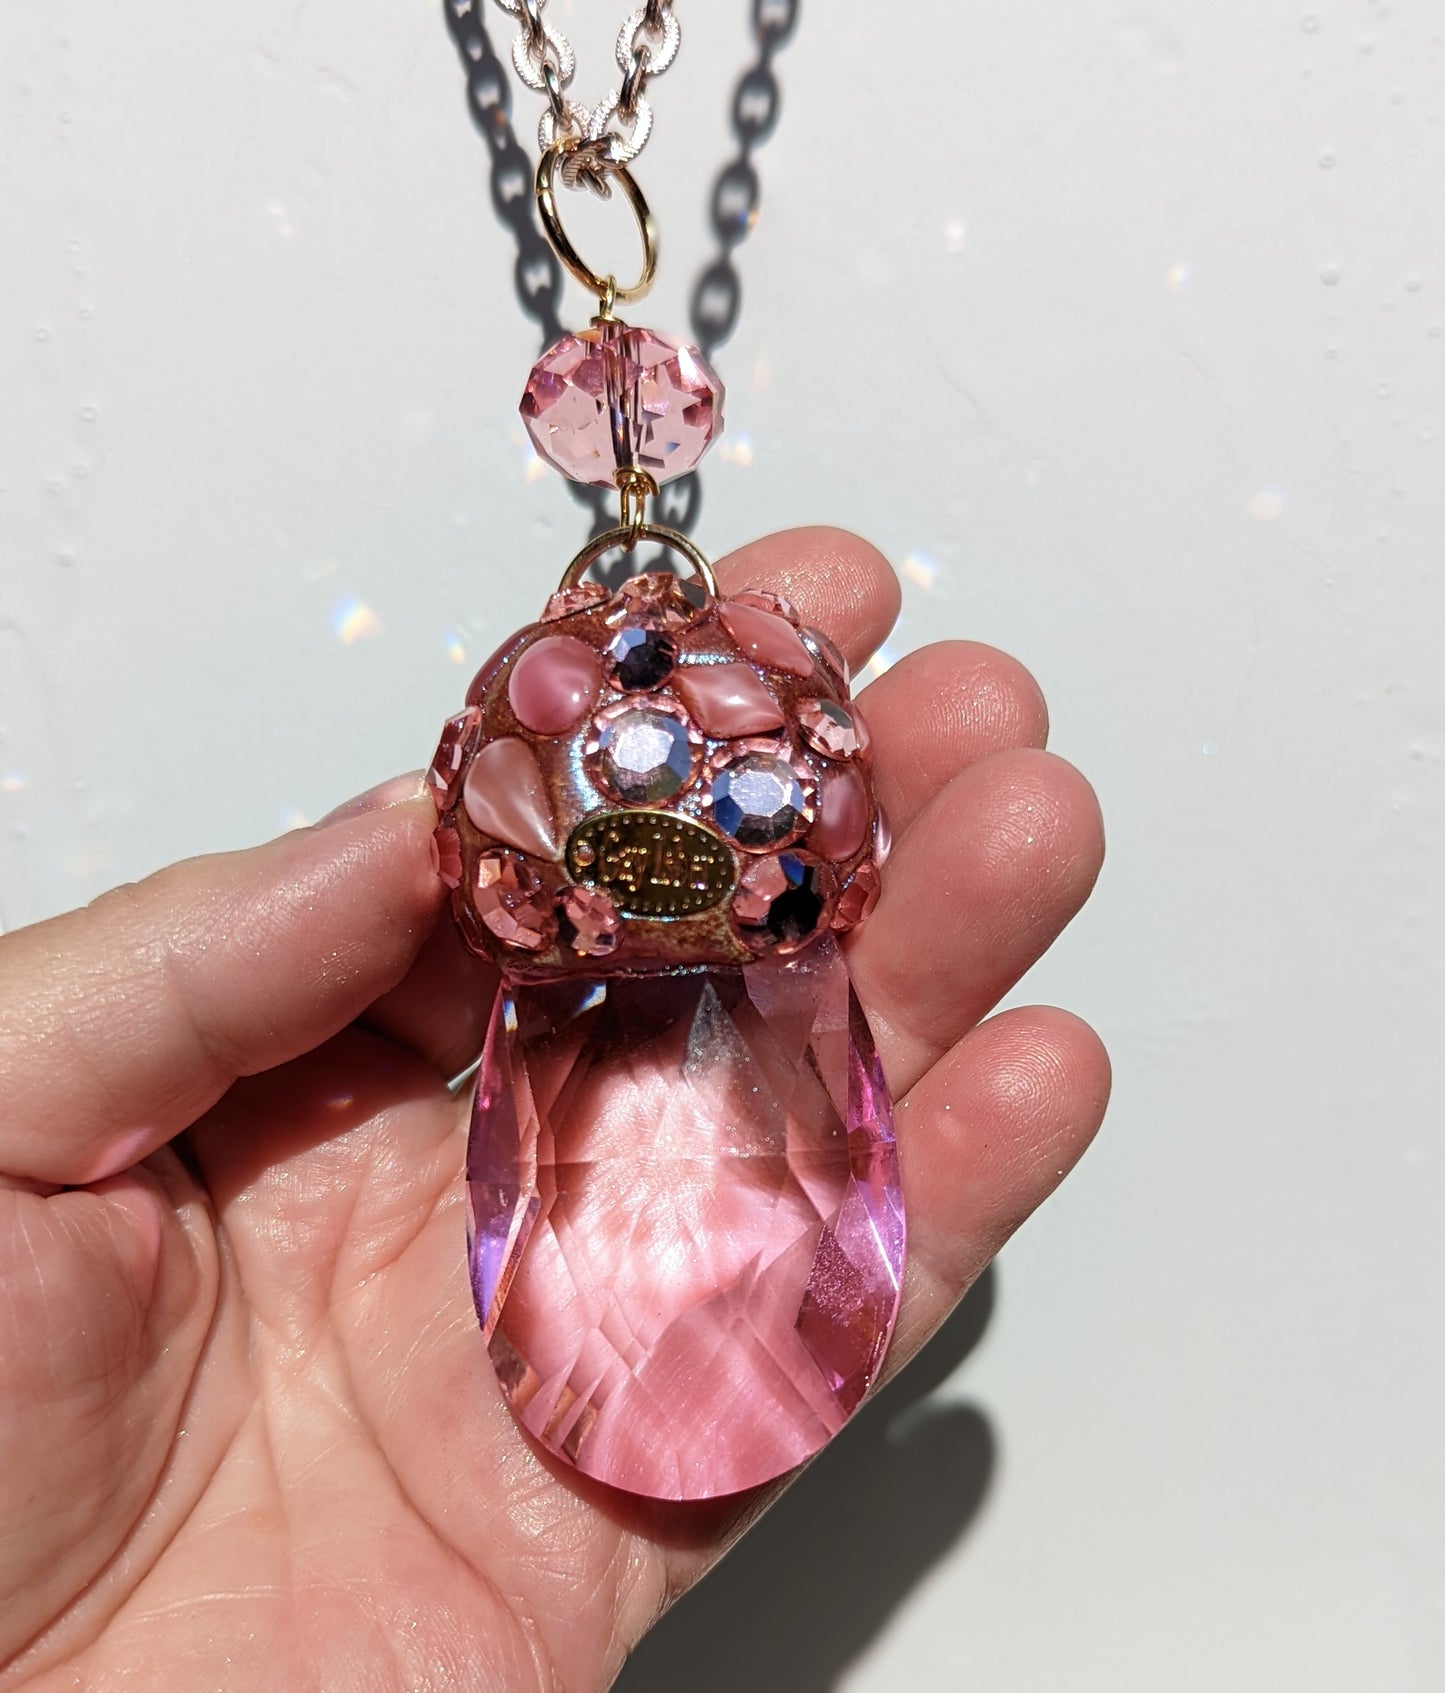 Pink Crystal pendant Pink Vintage Chain 48 inches Gay Isber Gift Box-Gay Isber Designs